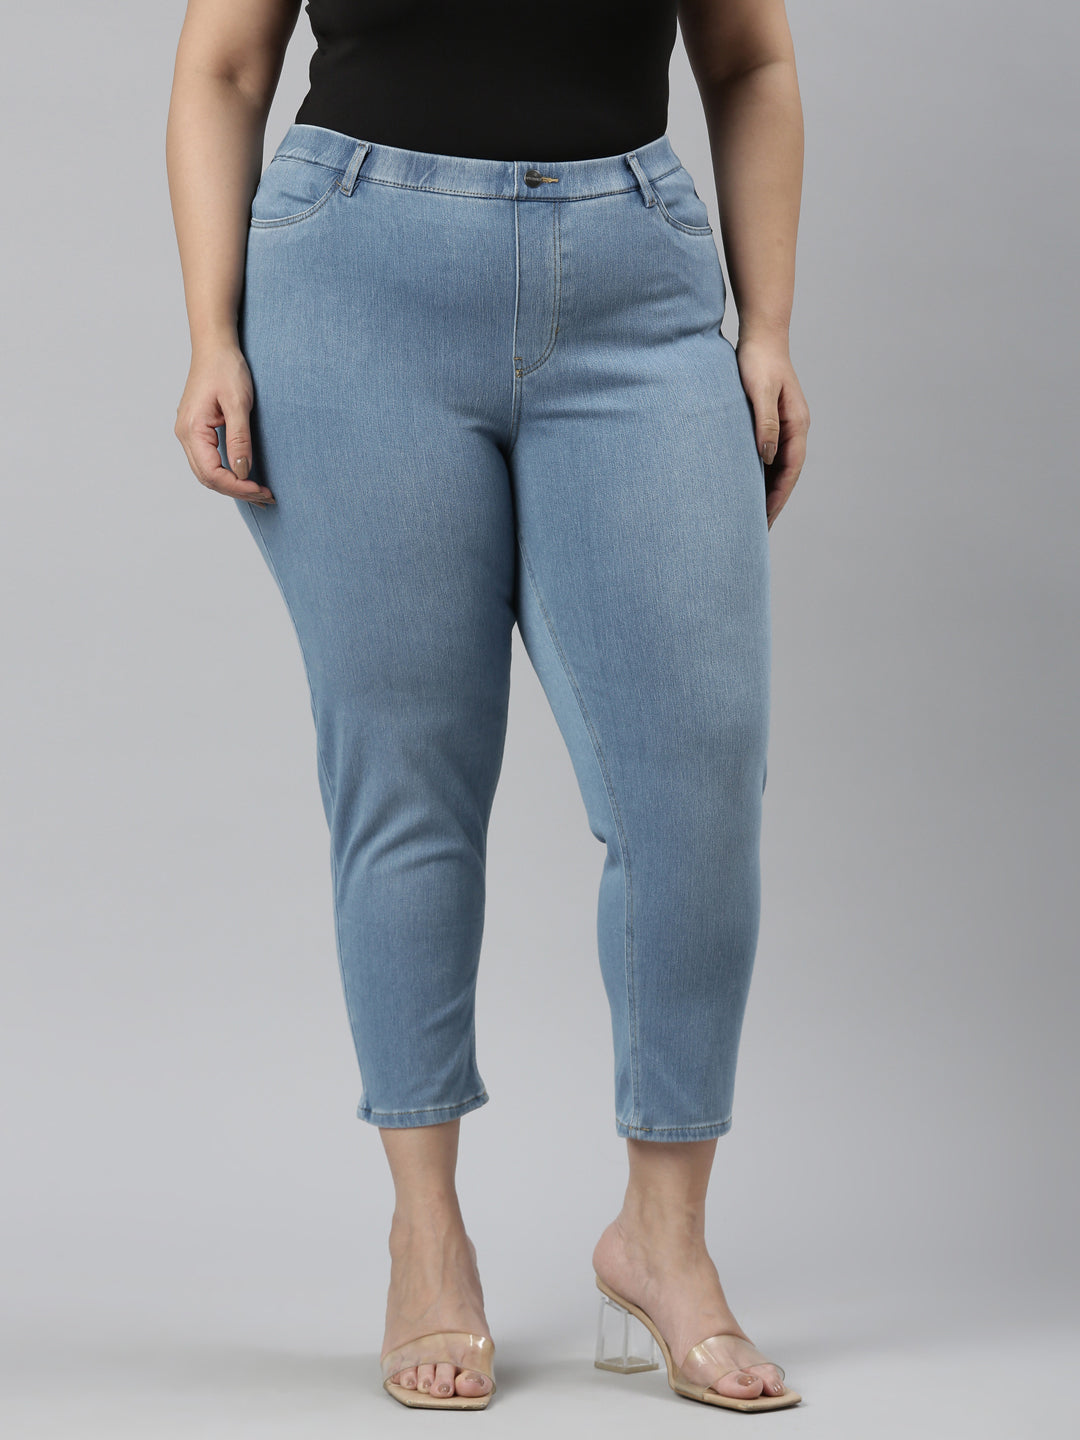 Just Love Solid Jeggings for Women (Light Blue, Small)